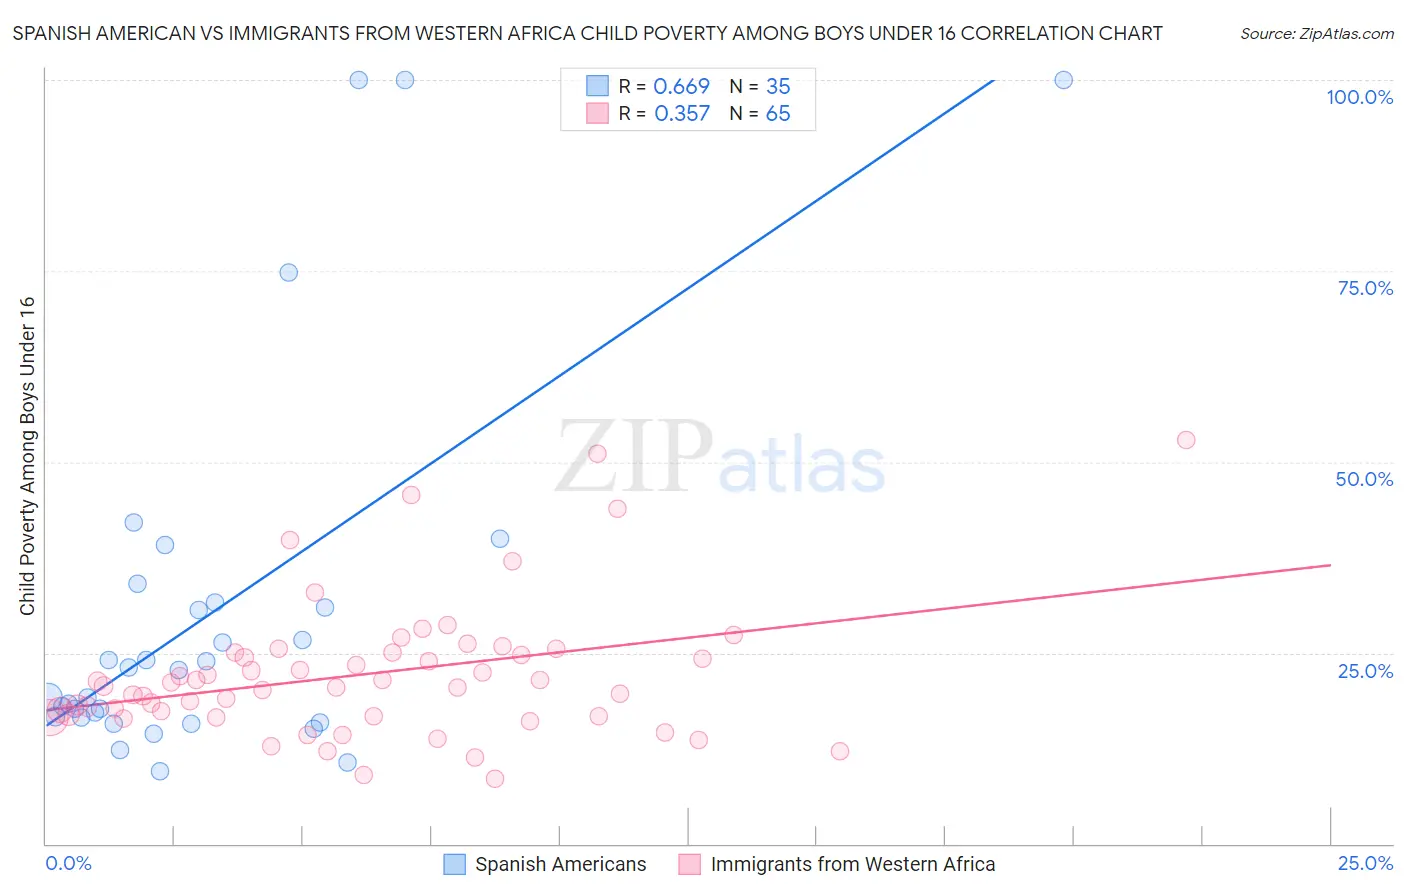 Spanish American vs Immigrants from Western Africa Child Poverty Among Boys Under 16